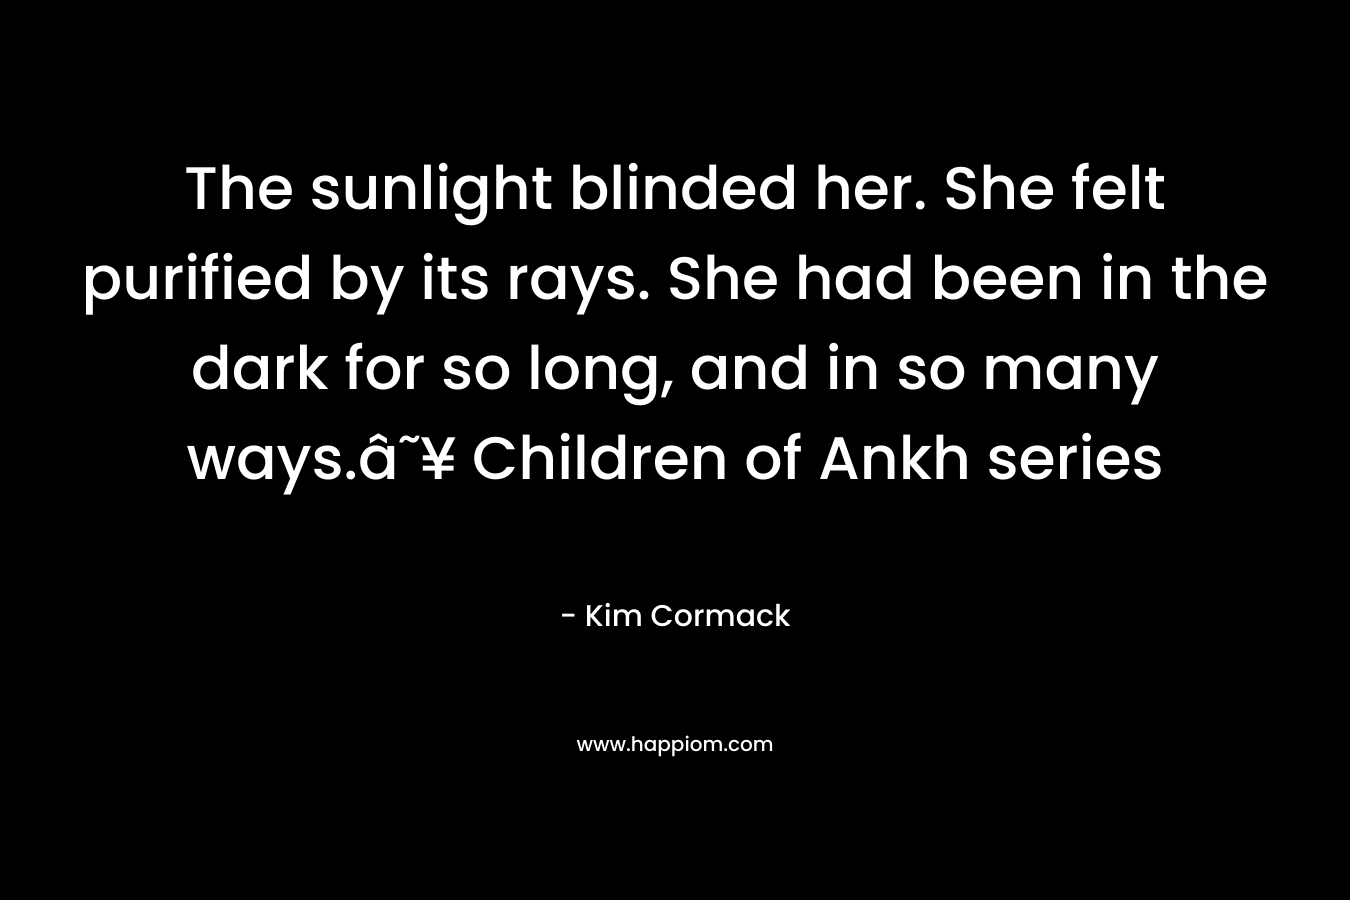 The sunlight blinded her. She felt purified by its rays. She had been in the dark for so long, and in so many ways.â˜¥ Children of Ankh series